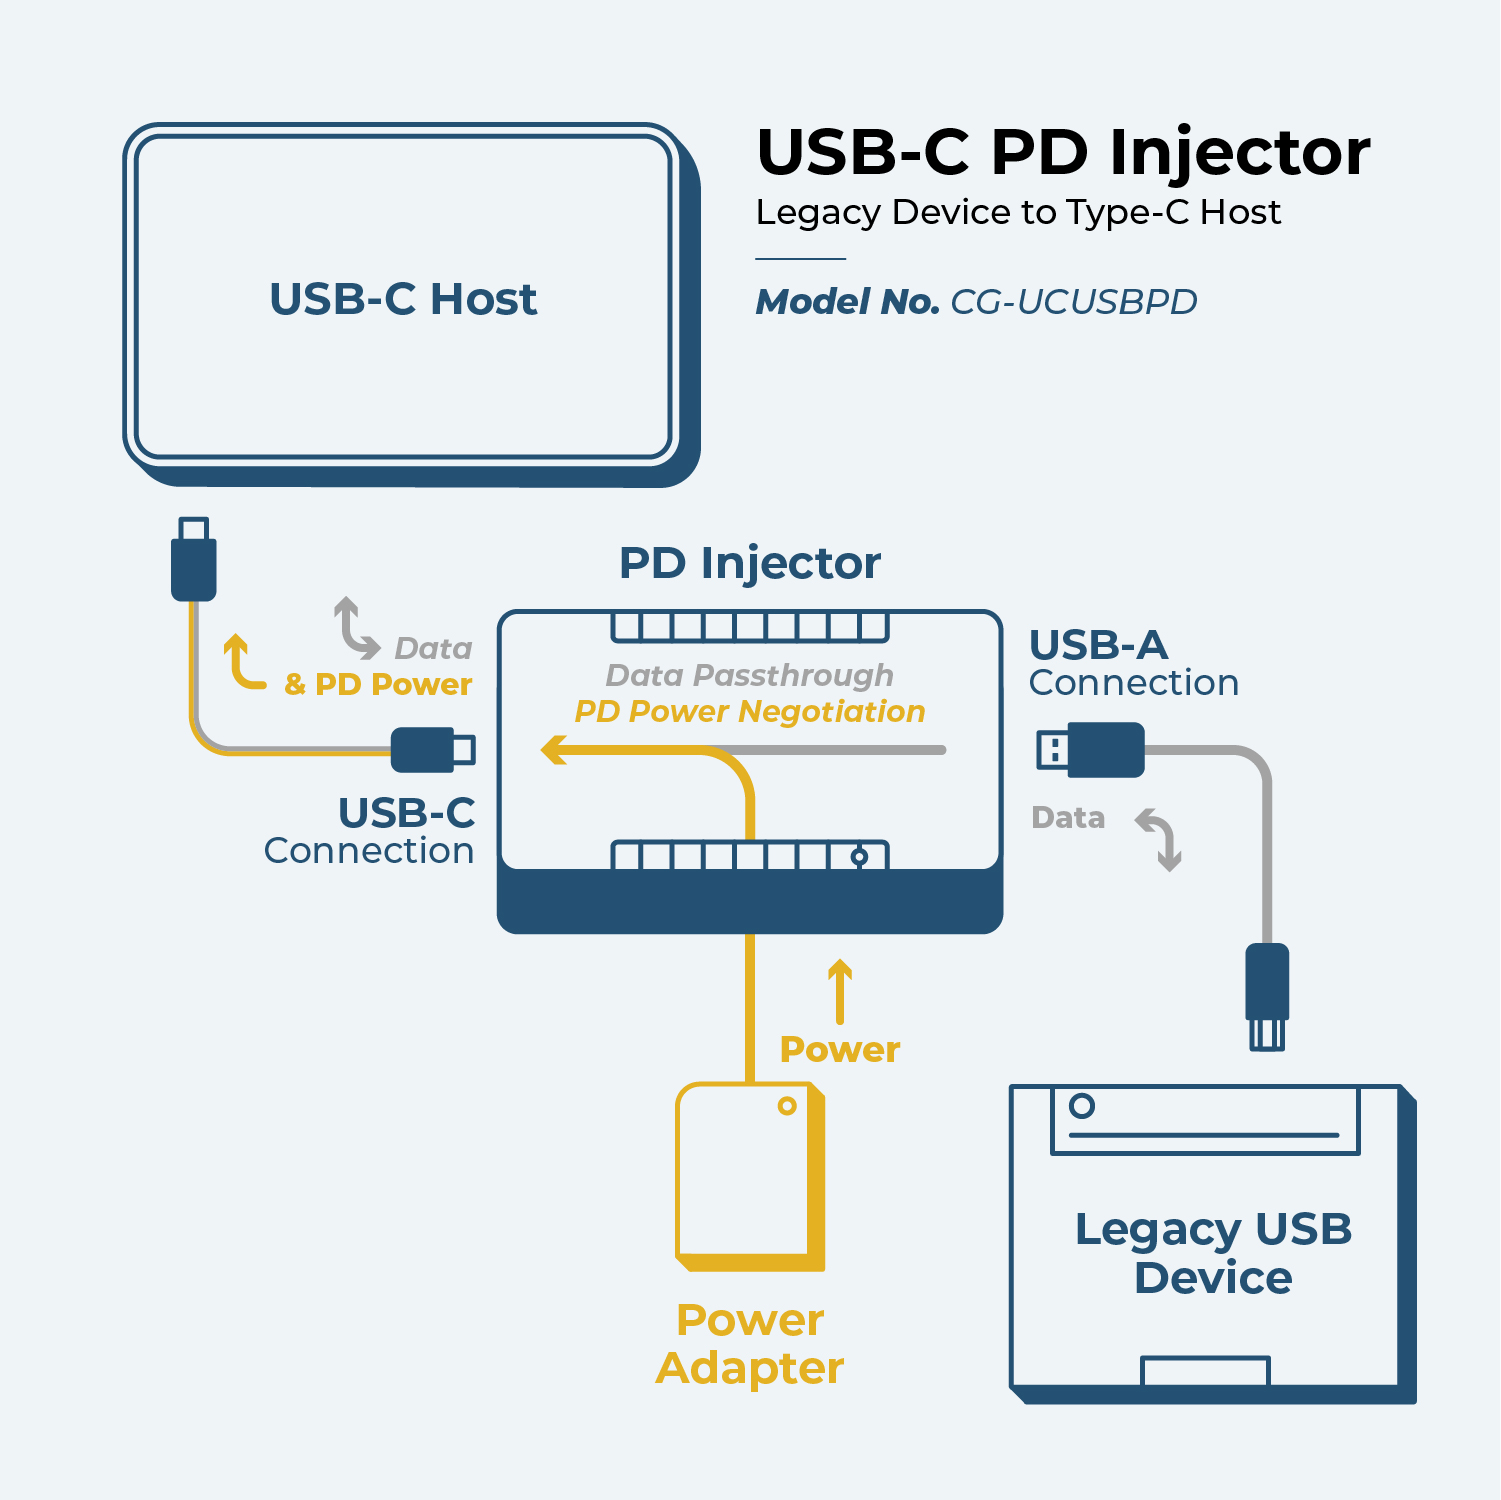 What Is USB-C and USB-C PD?